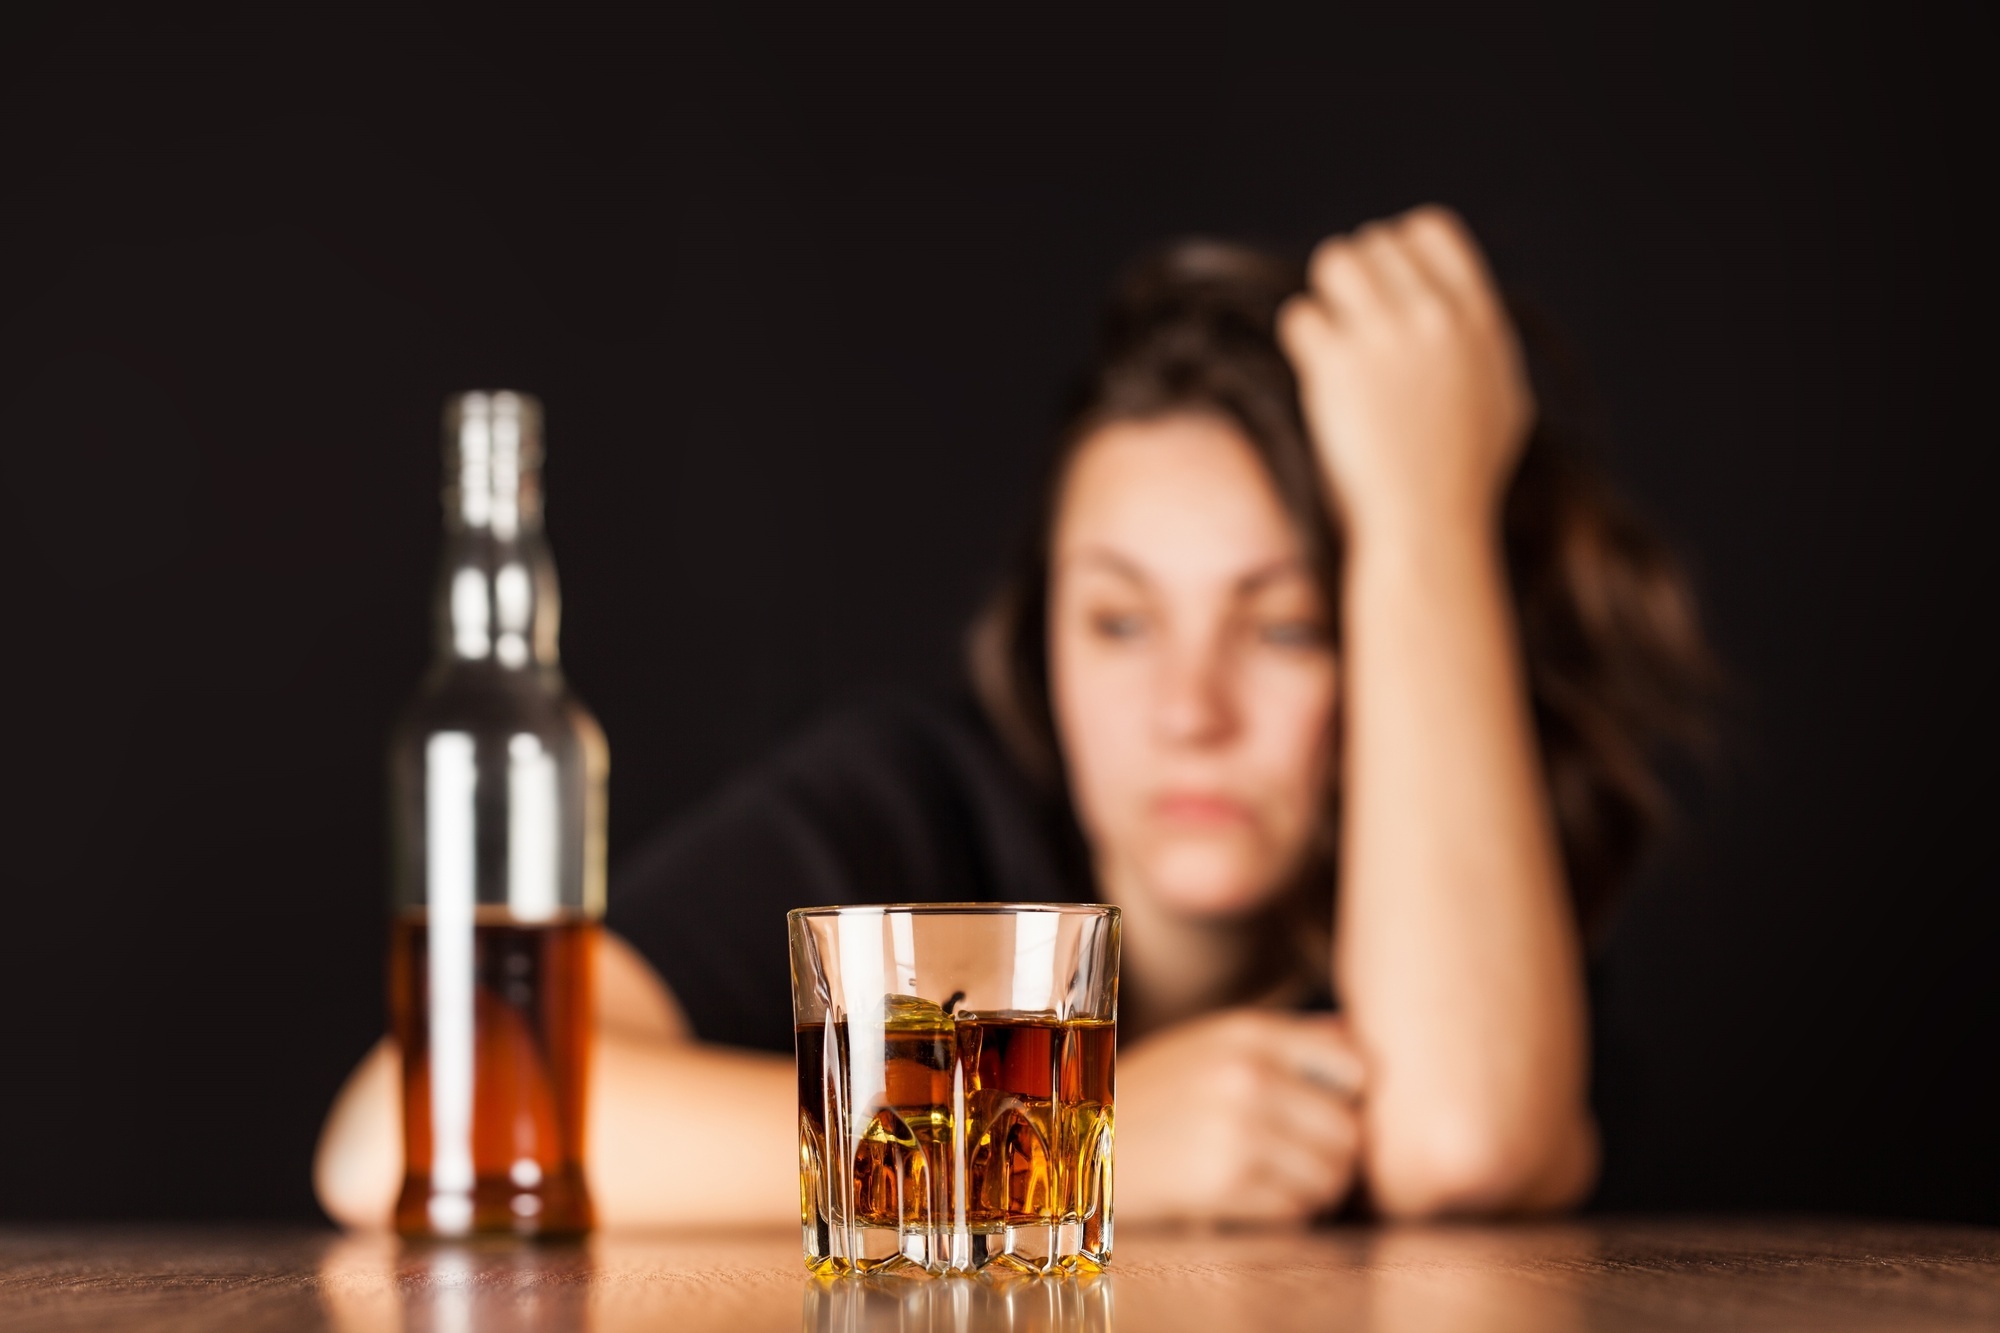 A Complete Guide to the Physical Signs of Alcohol Abuse